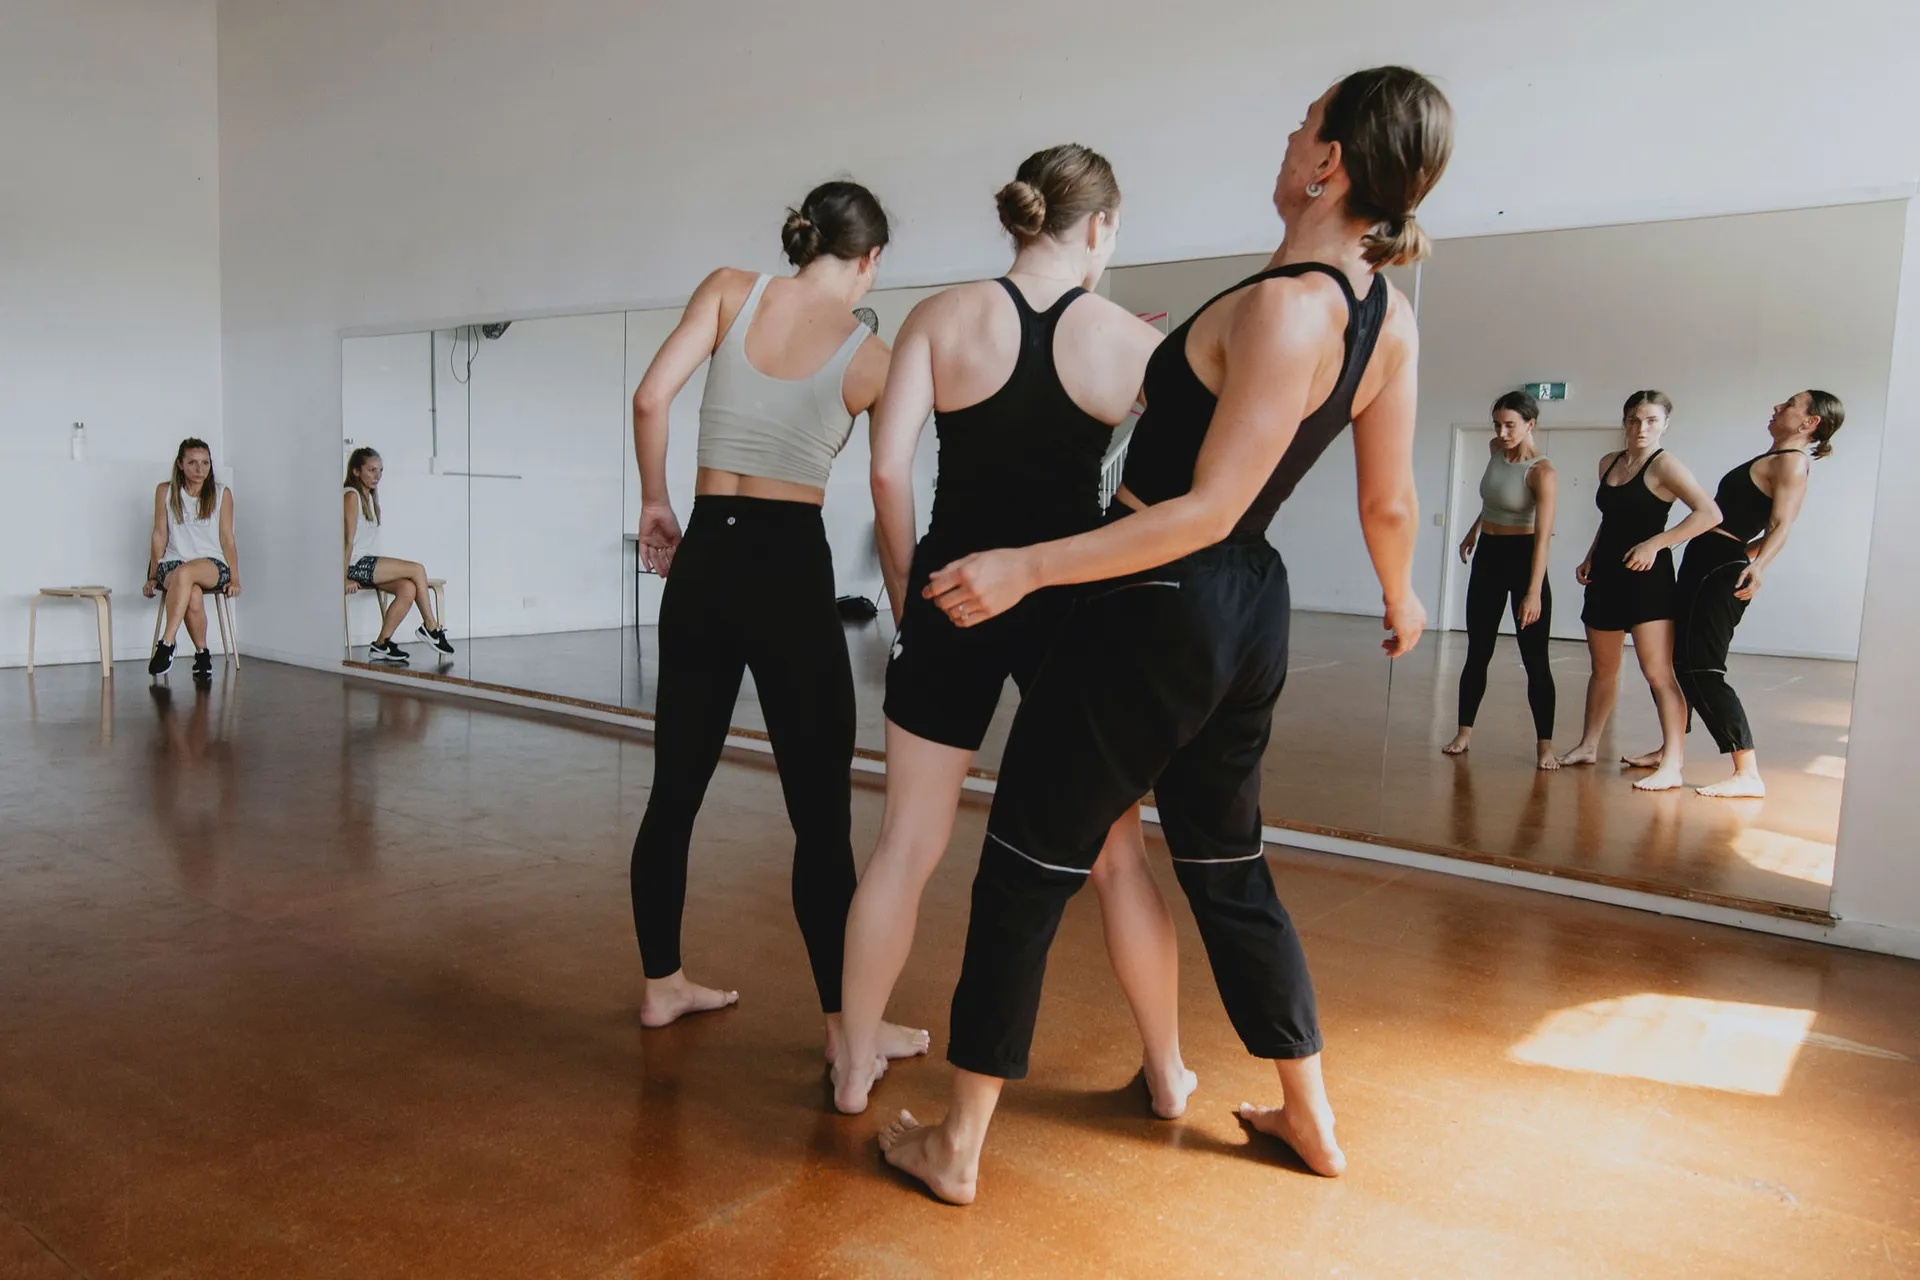 Image shows dancers in a studio